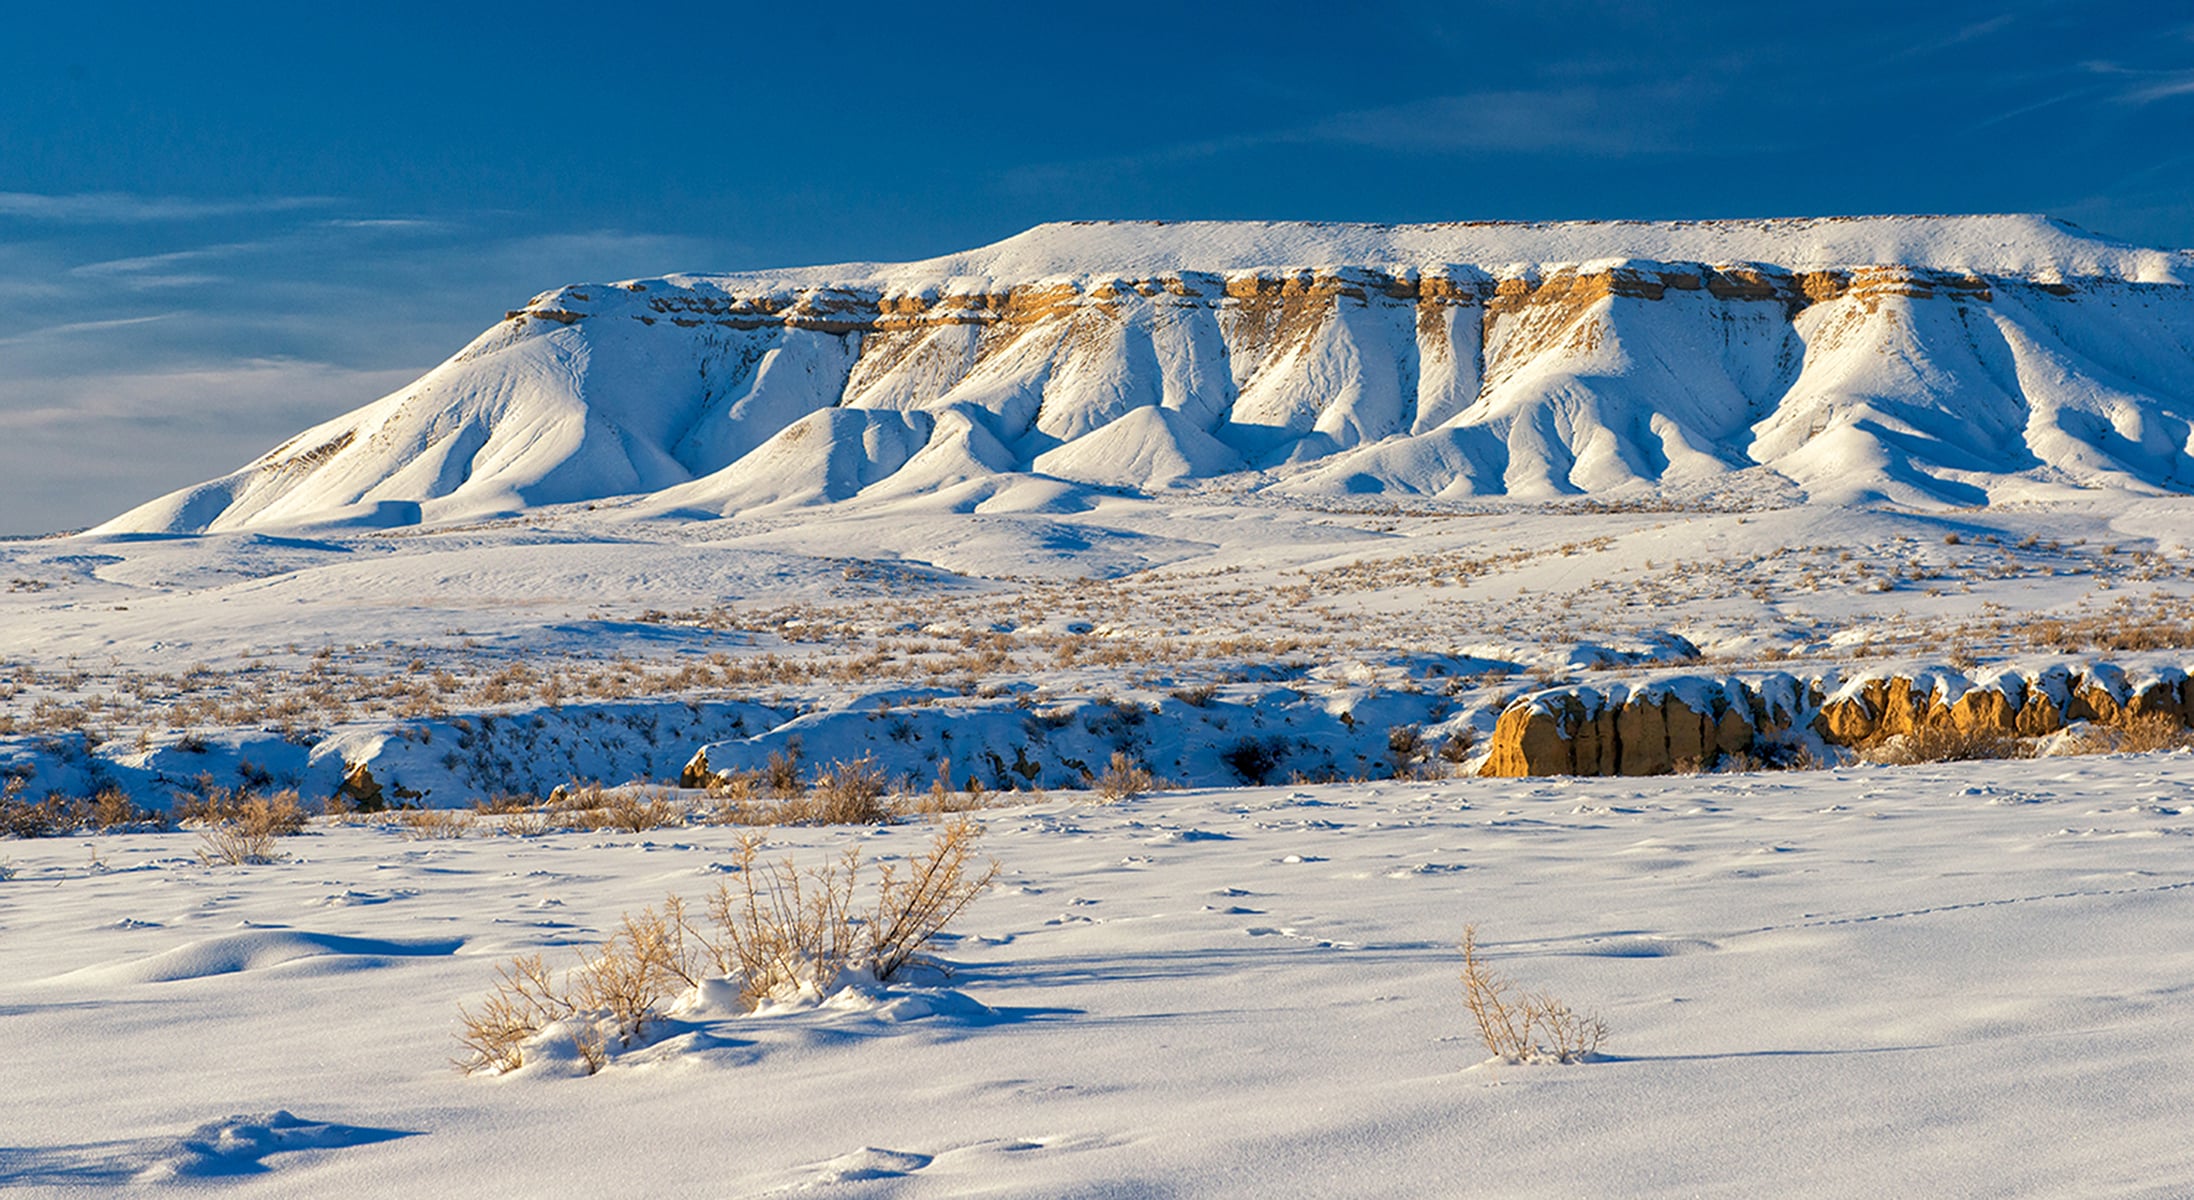 A mesa looks like it is covered in powdered sugar instead of snow in Rio Blanco County, Colorado